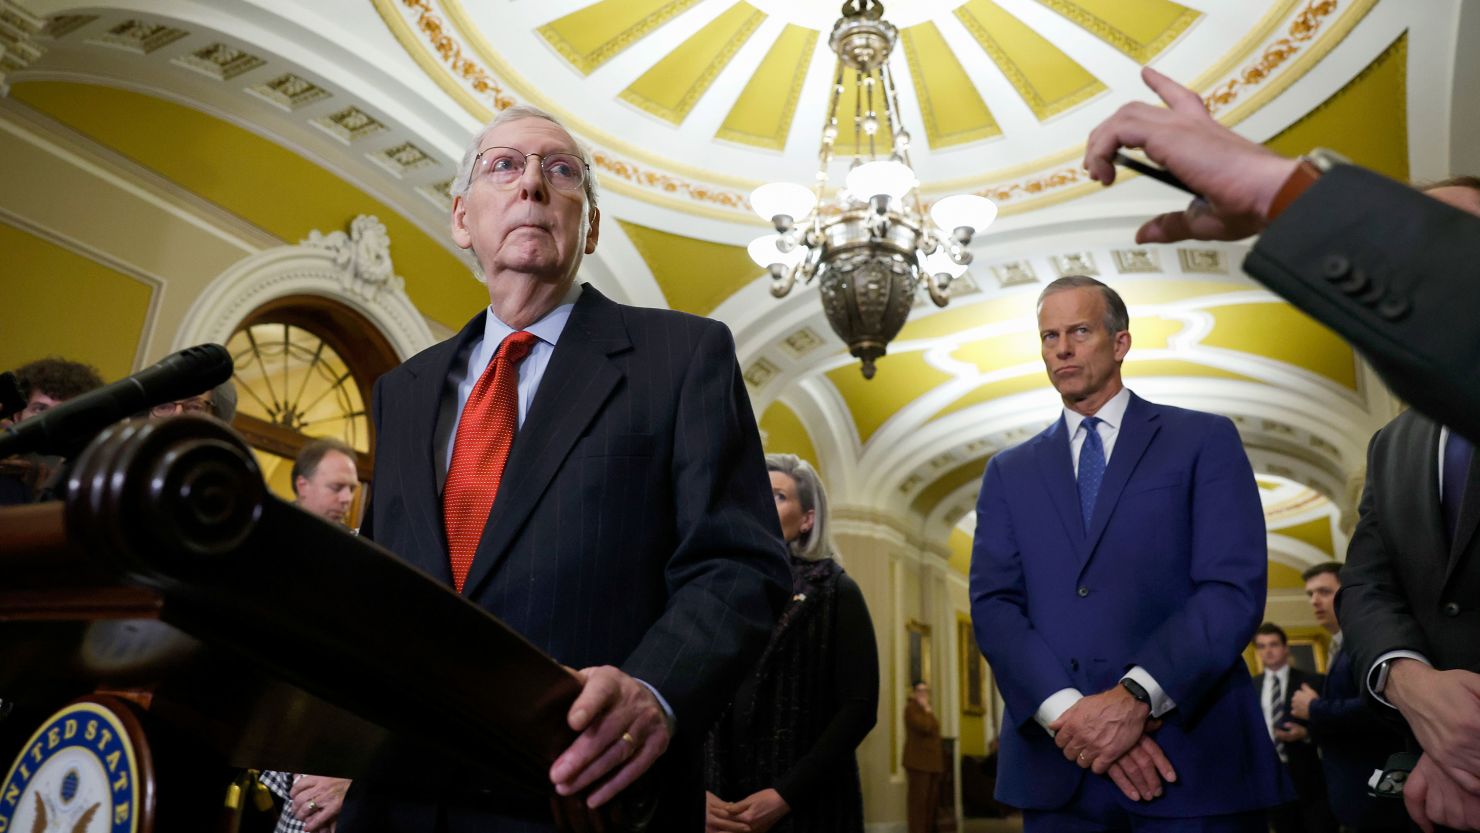 Senate Minority Leader Mitch McConnell concedes at a news conference Tuesday that the bipartisan Senate immigration bill does not have a chance of passage.